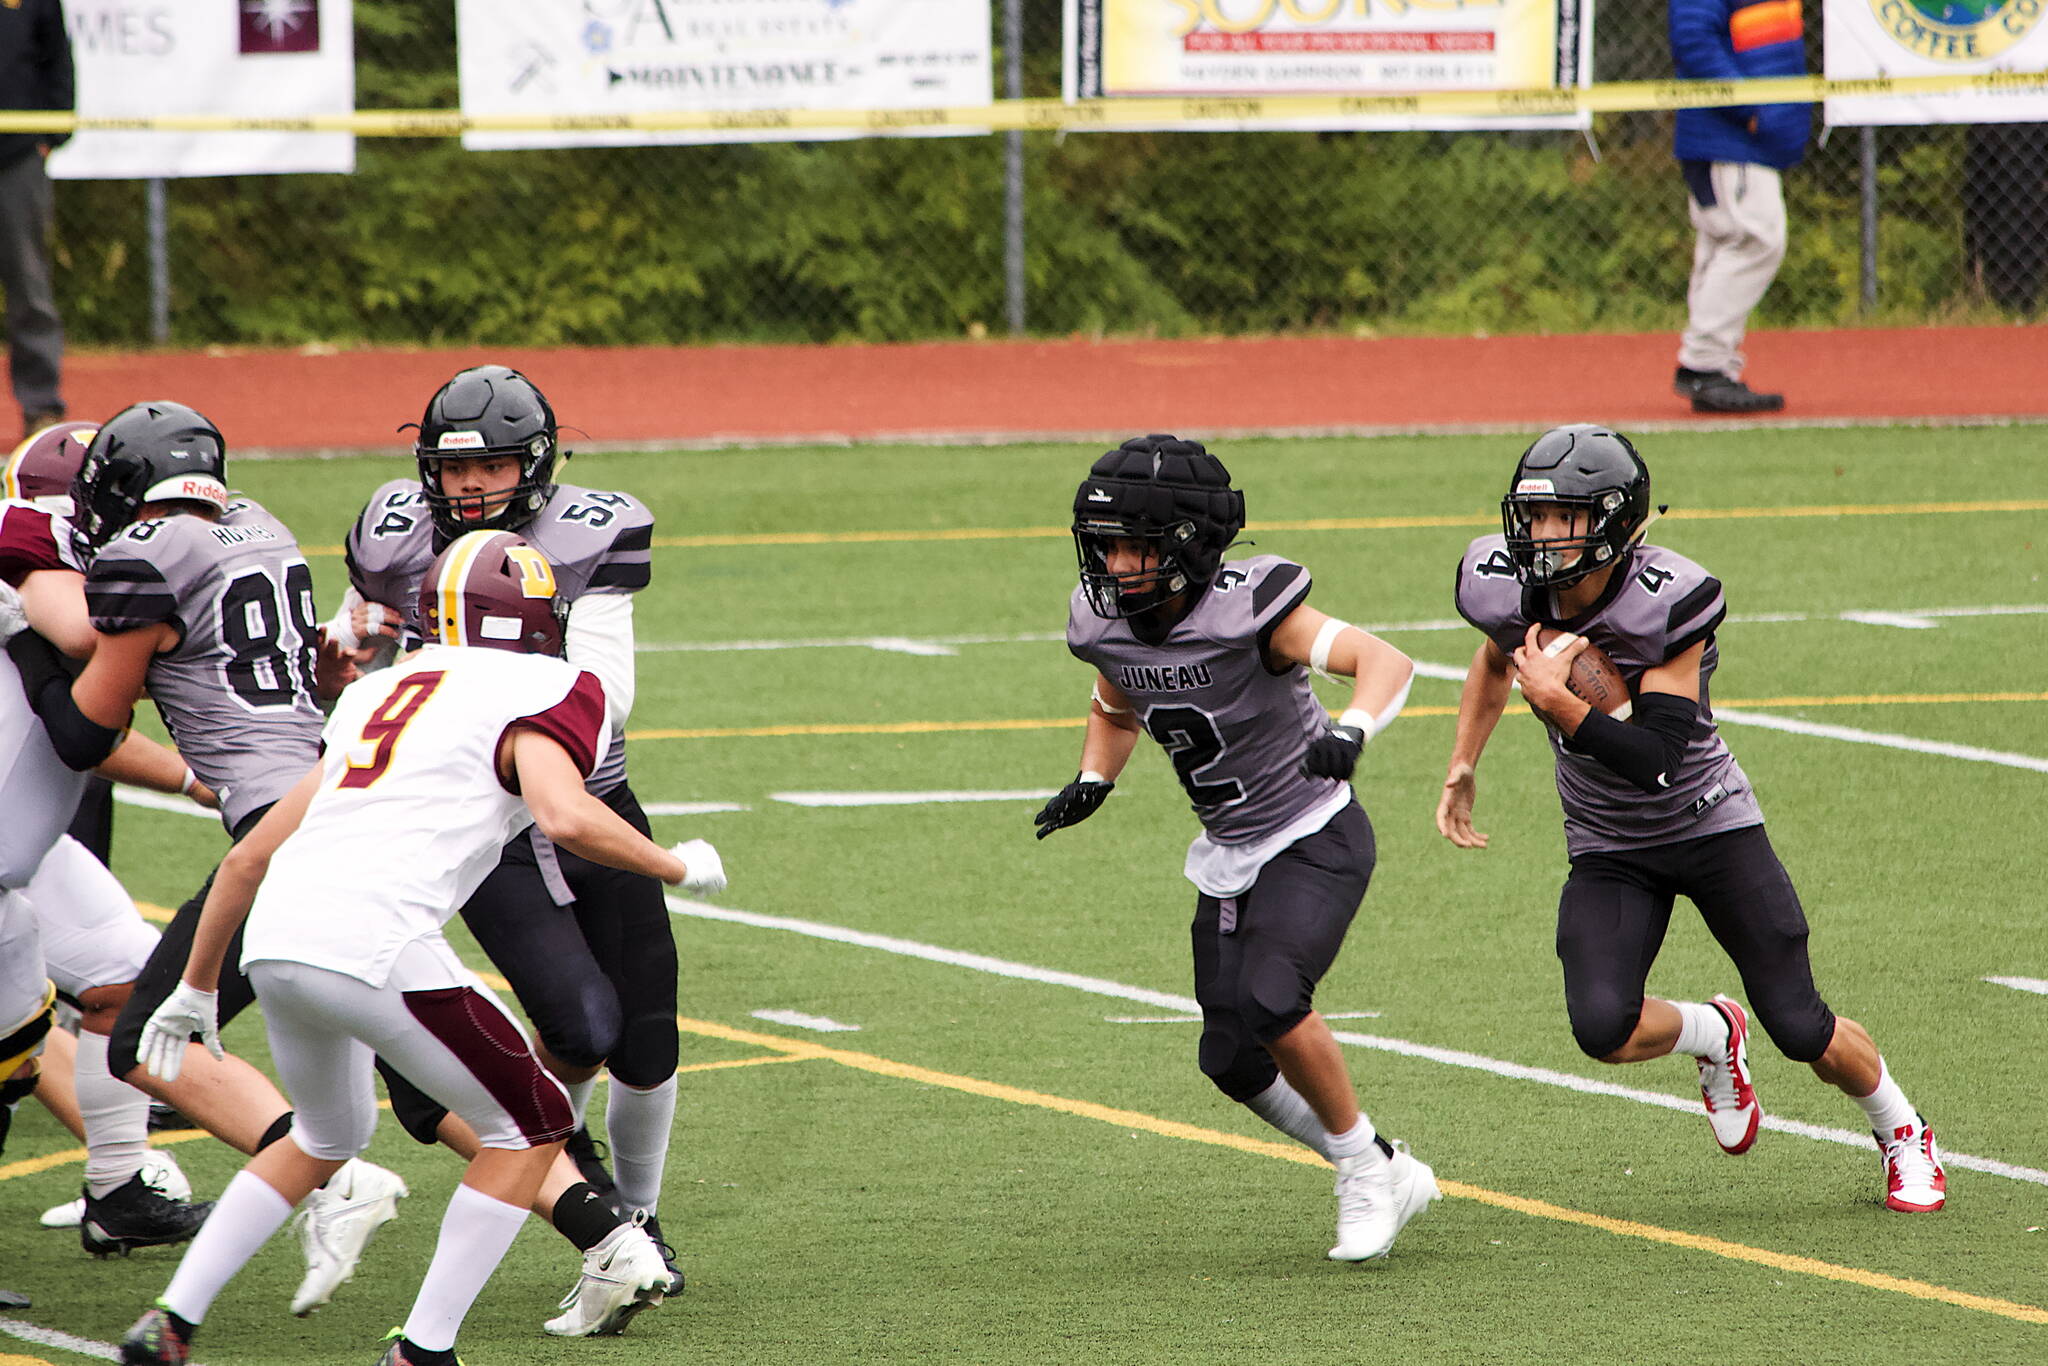 Jayden Johnson (4) looks for running room behind Hayden Aube (2) in the second quarter in the Juneau Huskies’ game against the Dimond High School Lynx on Saturday at Adair-Kennedy Field. Johnson had 286 all-purpose yards and four touchdowns for the Huskies. (Mark Sabbatini / Juneau Empire)